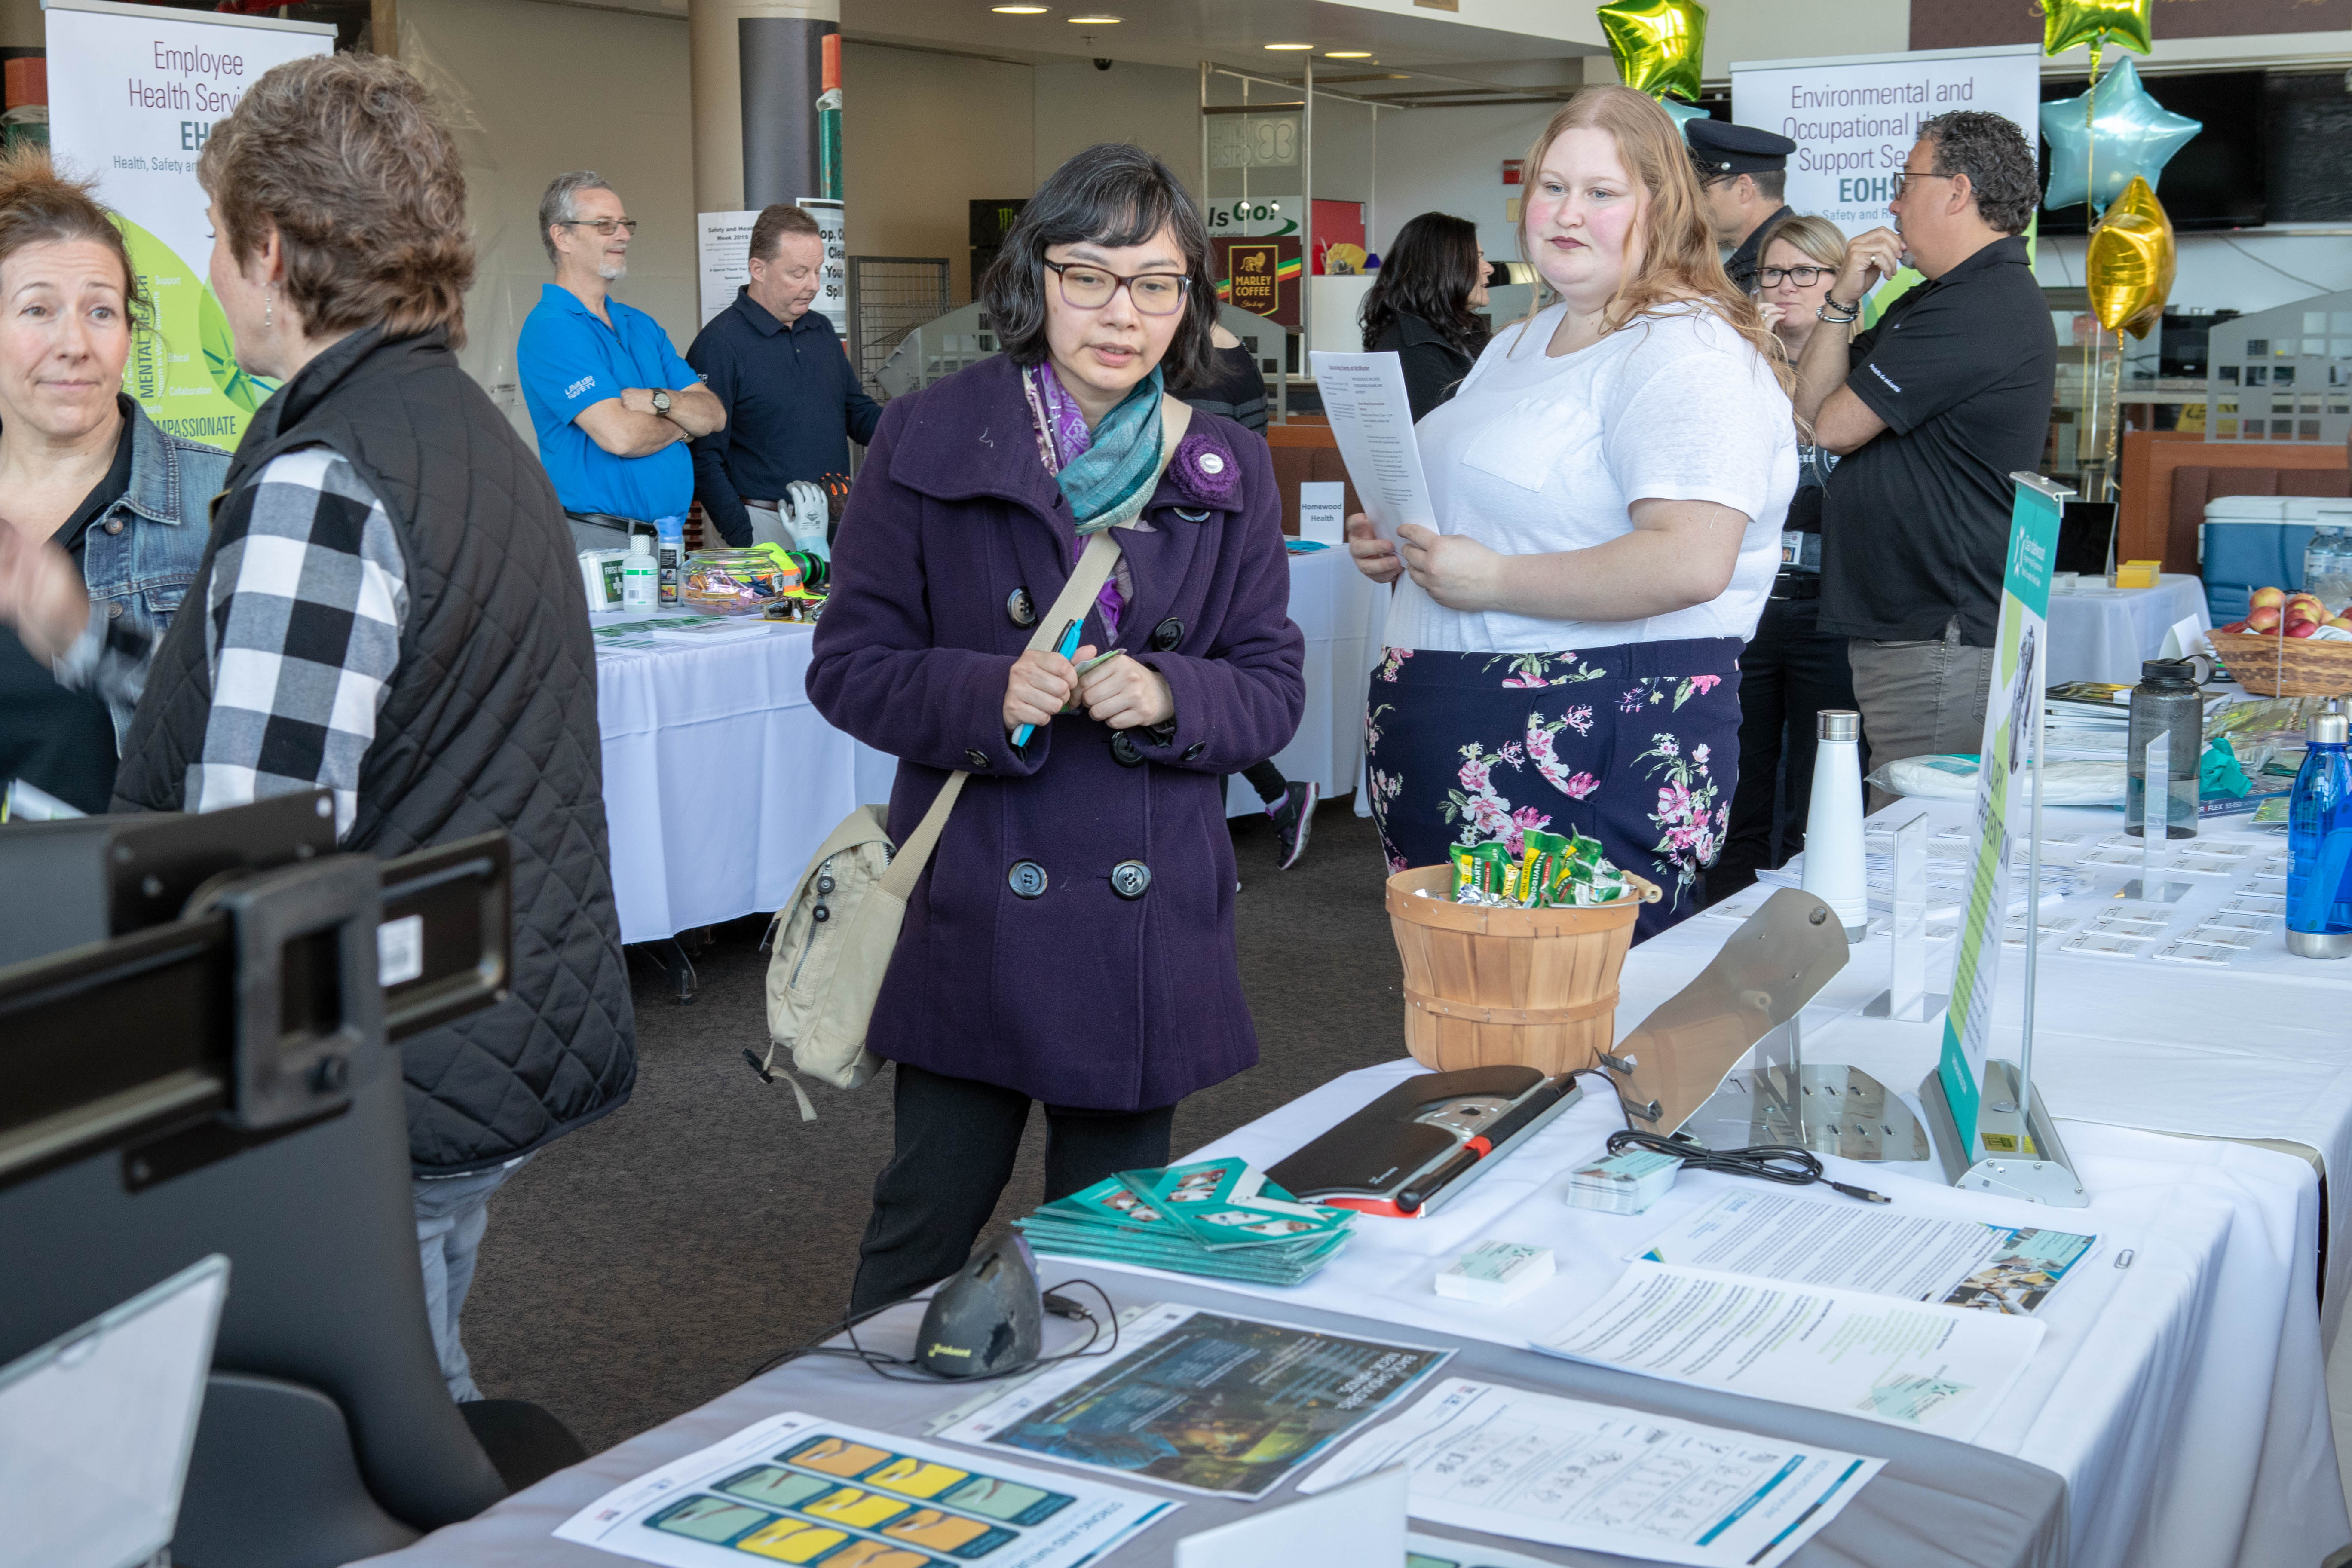 McMaster community members attend the Health and Safety Week annual vendor fair.